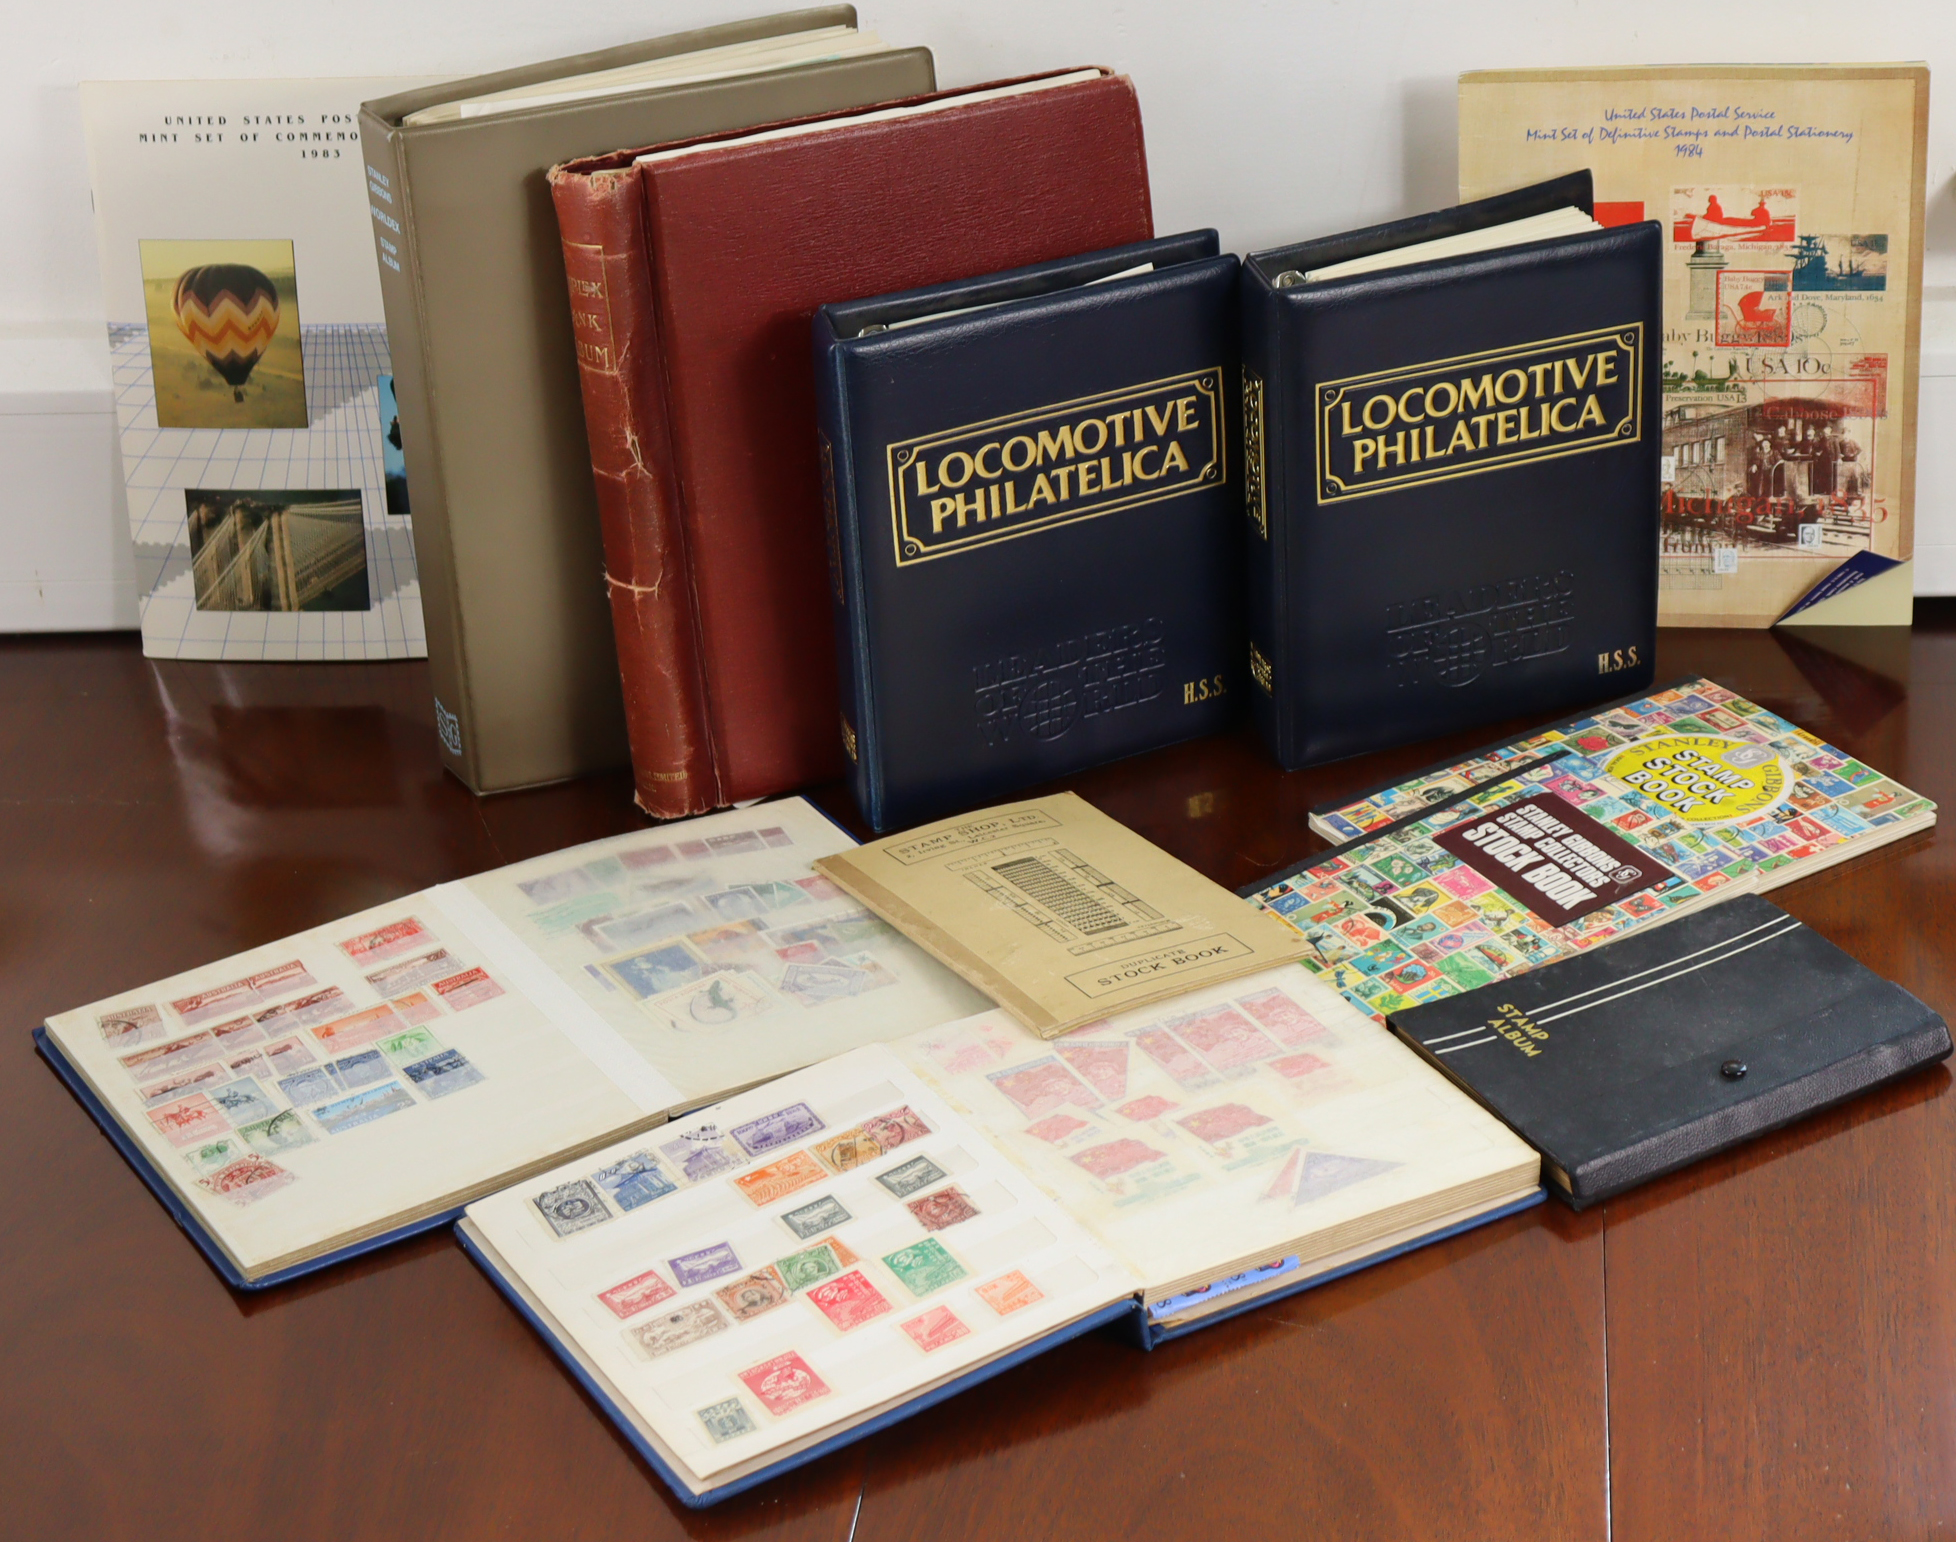 A collection of foreign stamps in various albums, on loose stock-back leaves, & loose in envelopes.